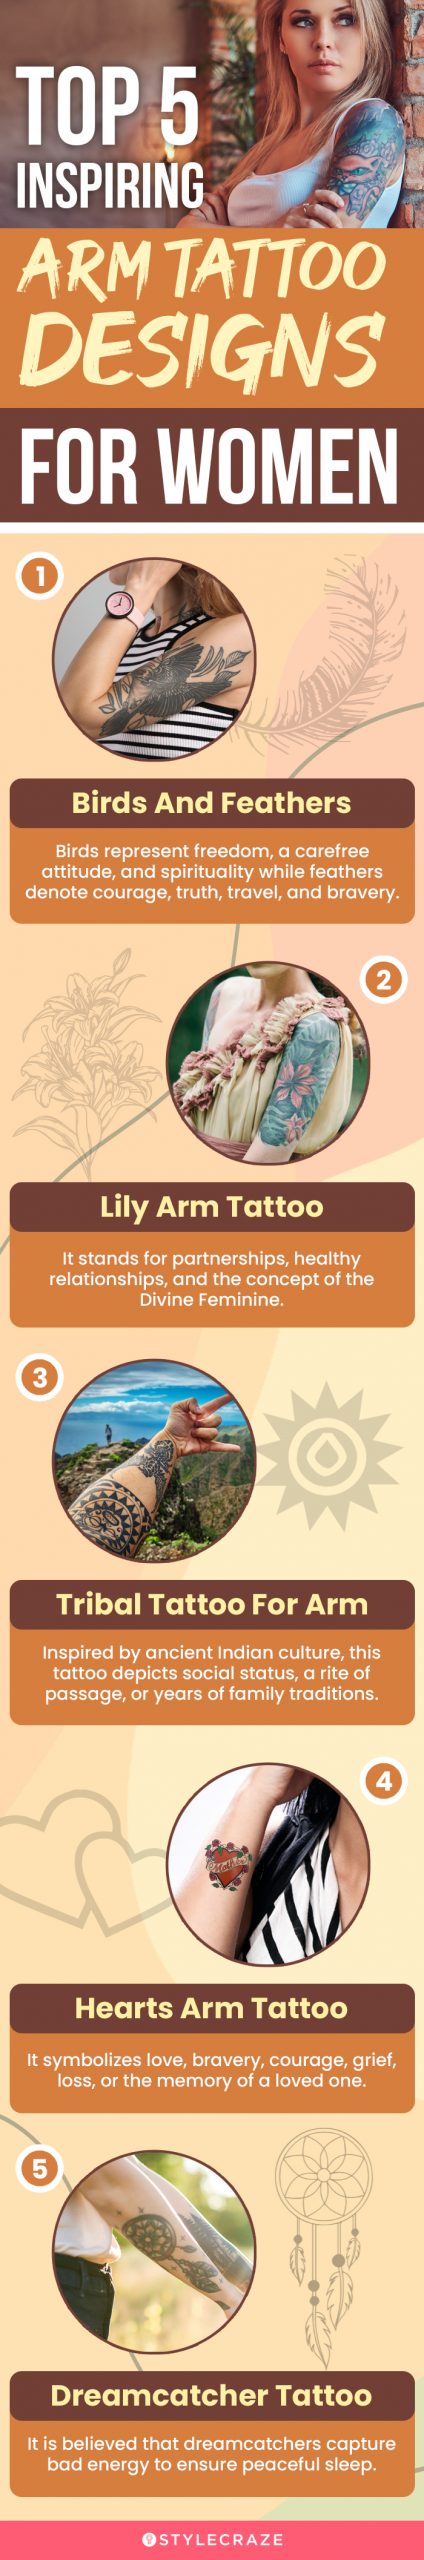 top 5 inspiring arm tattoo designs for women (infographic)